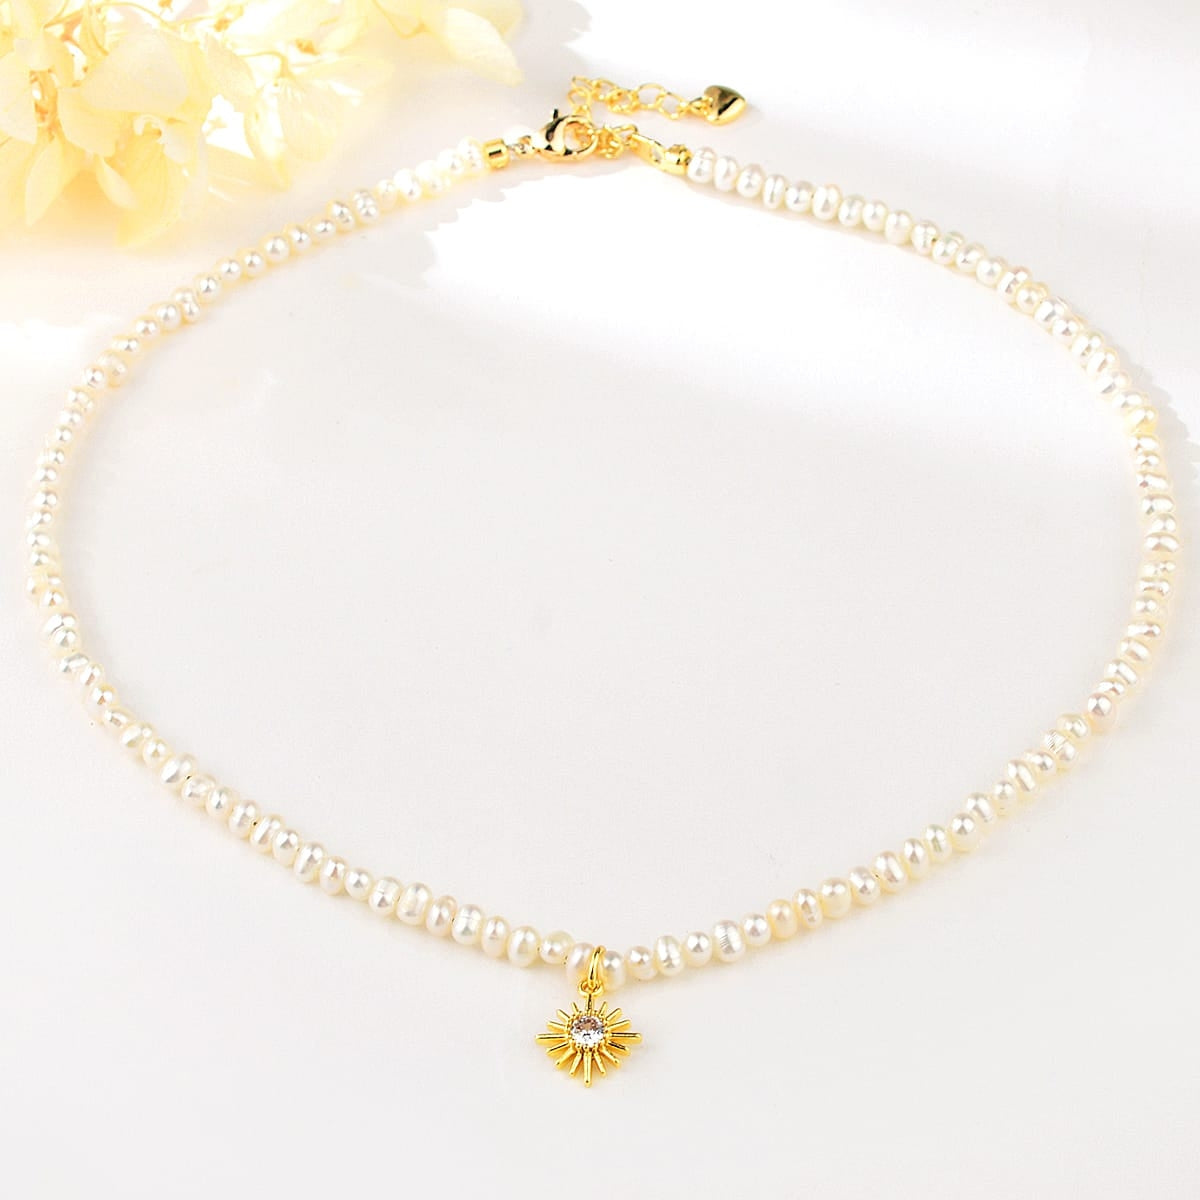 CLASSIC FRESH WATER PEARL NECKLACE